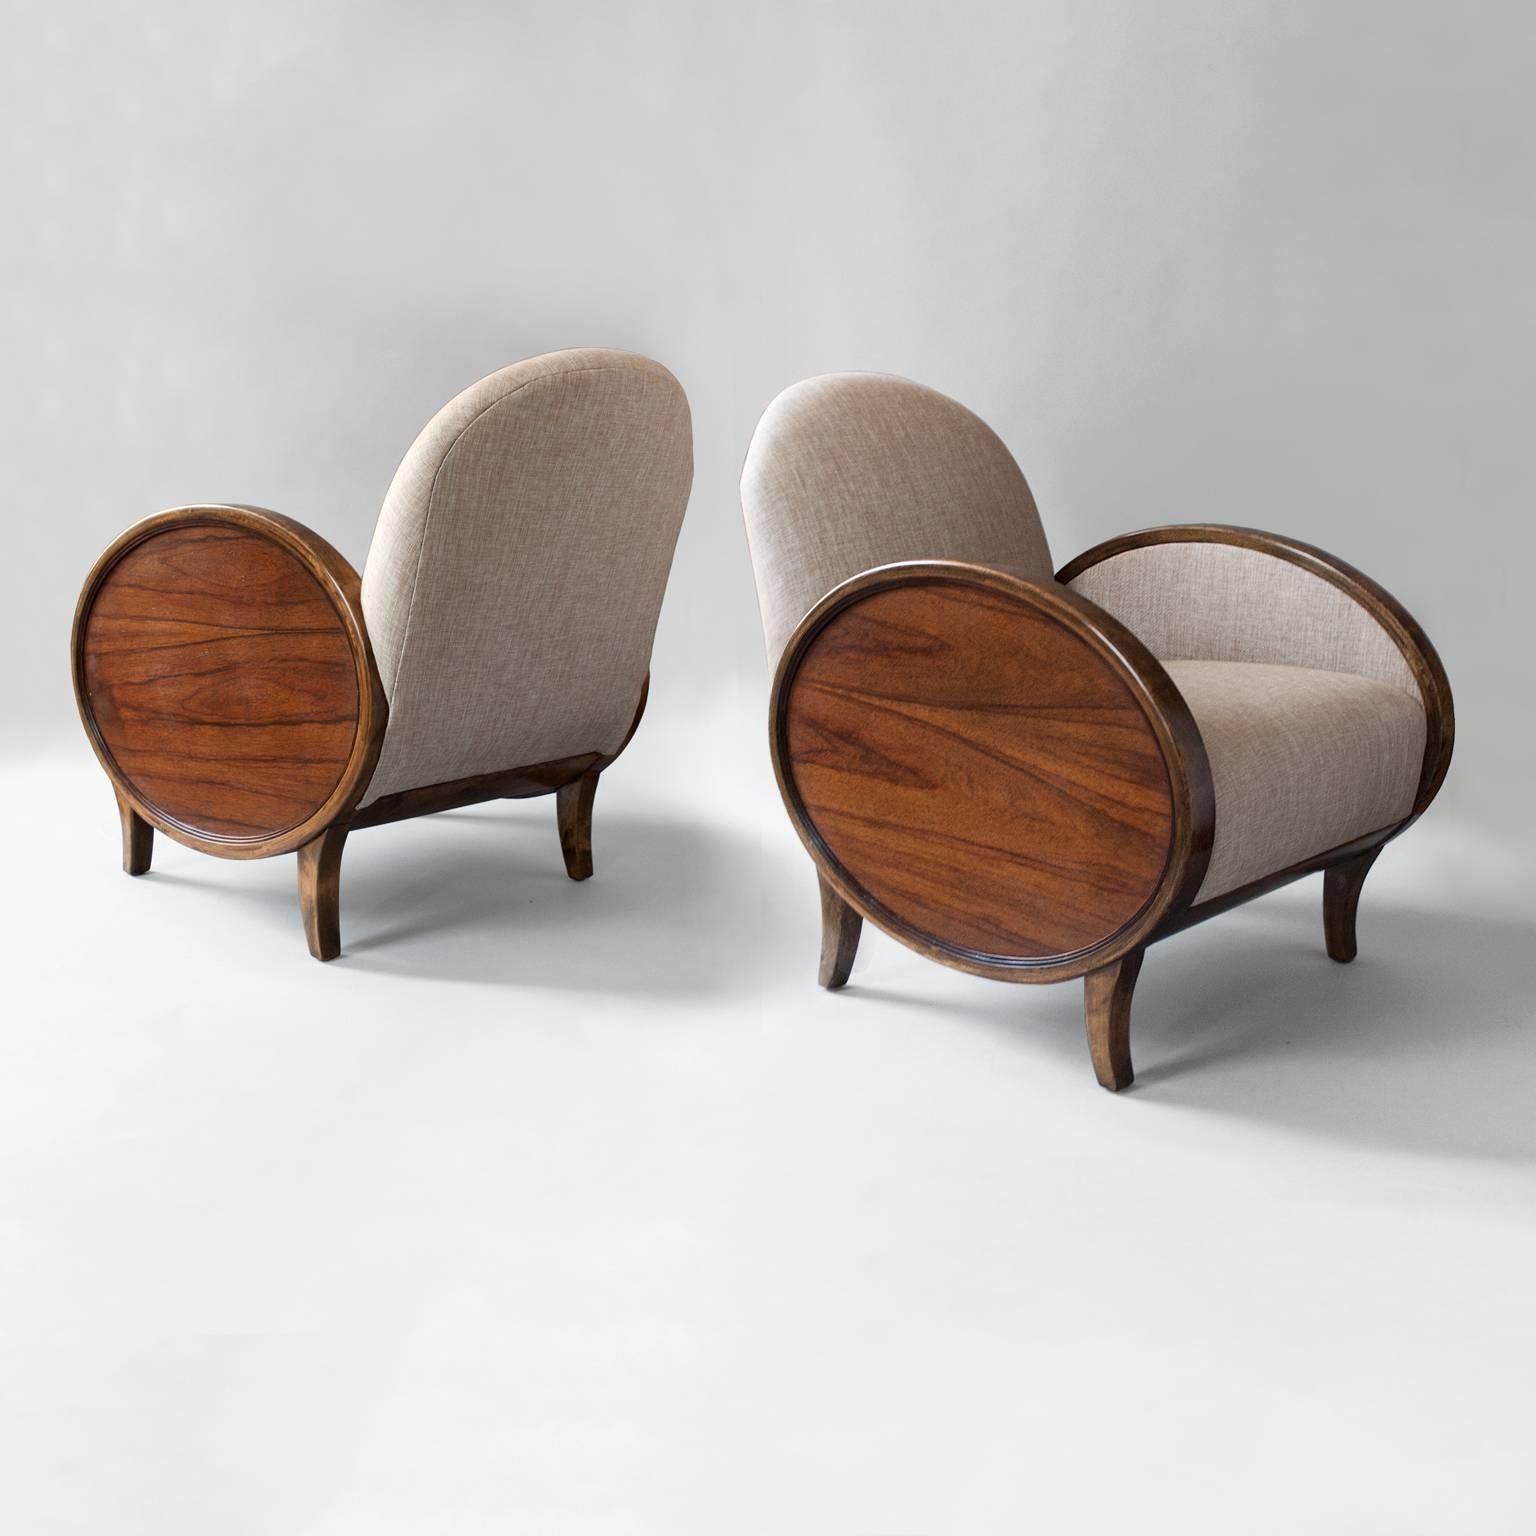 Pair of Scandinavian Modern Swedish Art Deco bergères with solid stained birch frames and oval rosewood side panels. The dramatic oval side panels look as modern today as they must have in the 1930's. Newly restored and upholstered. Measures: Height